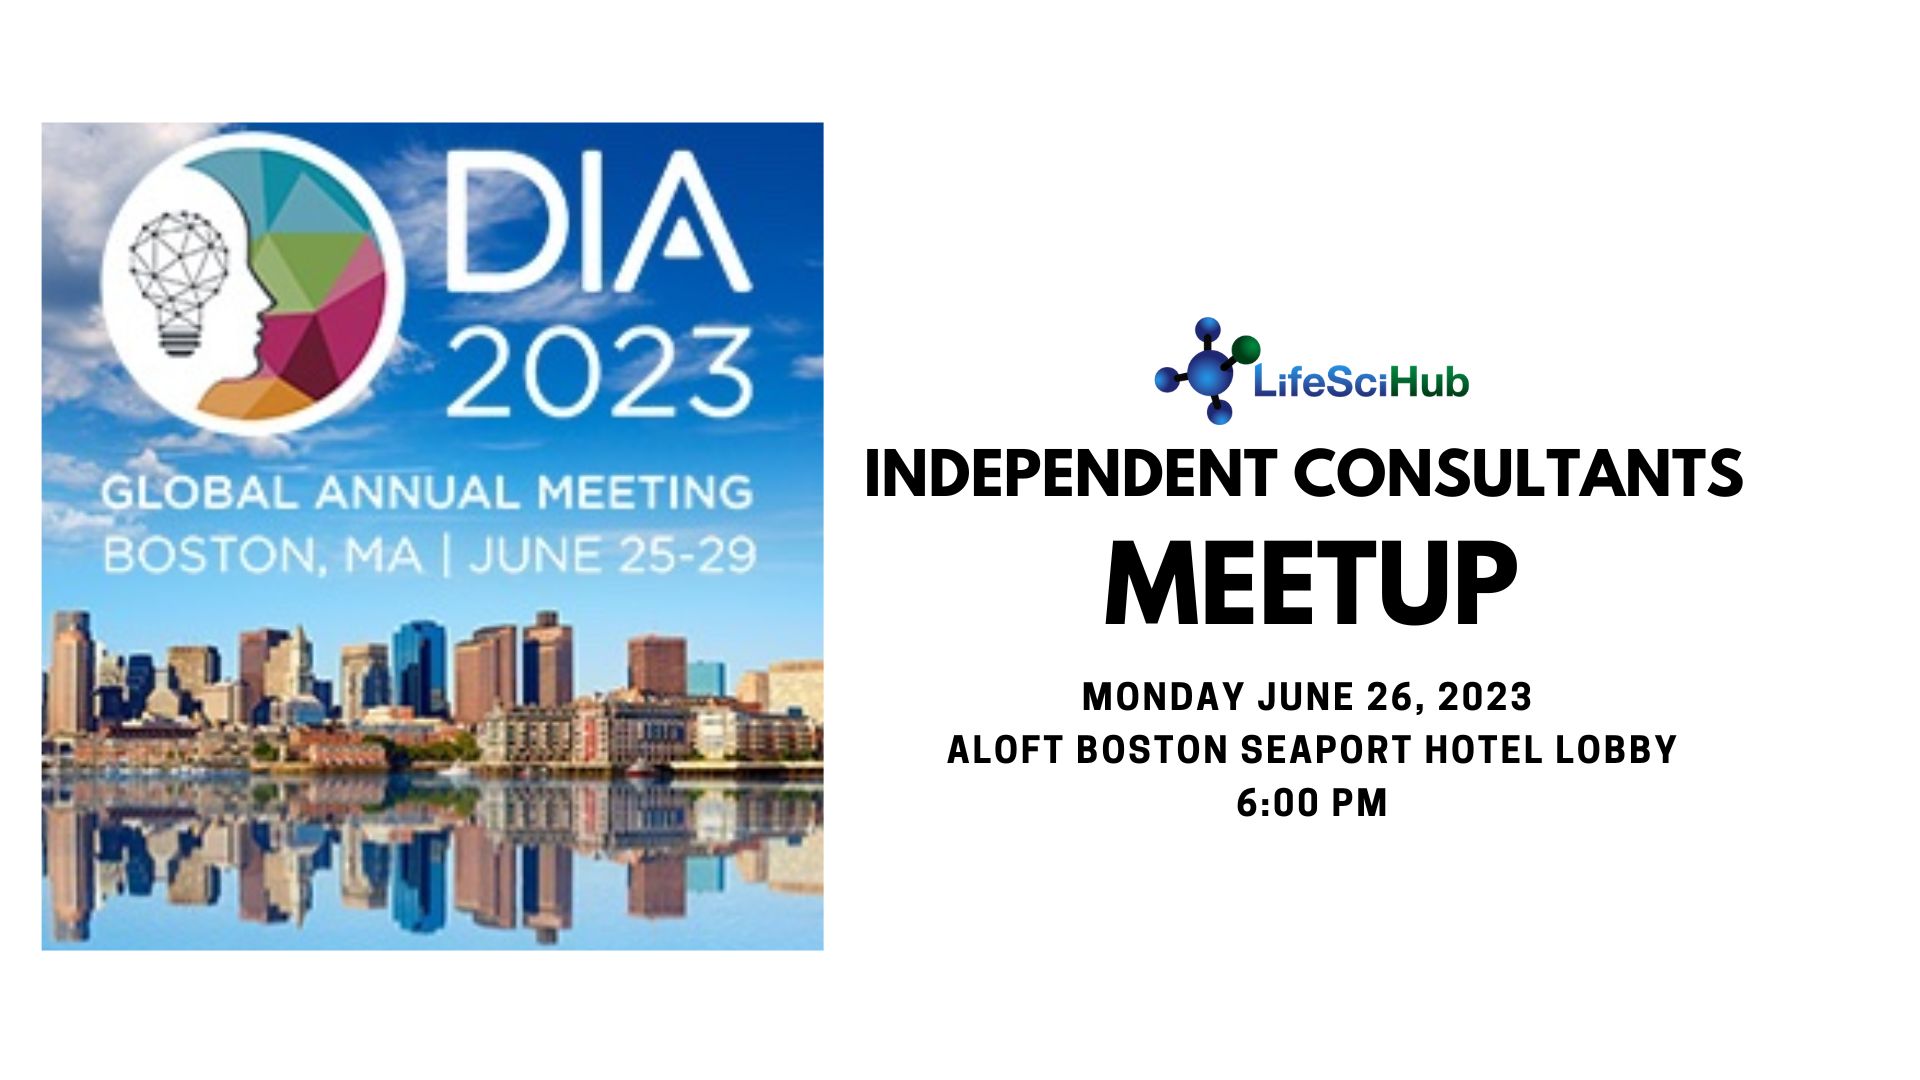 Independent Consultant Meetup at the DIA Annual in Boston, June 26, 2023, 6 PM